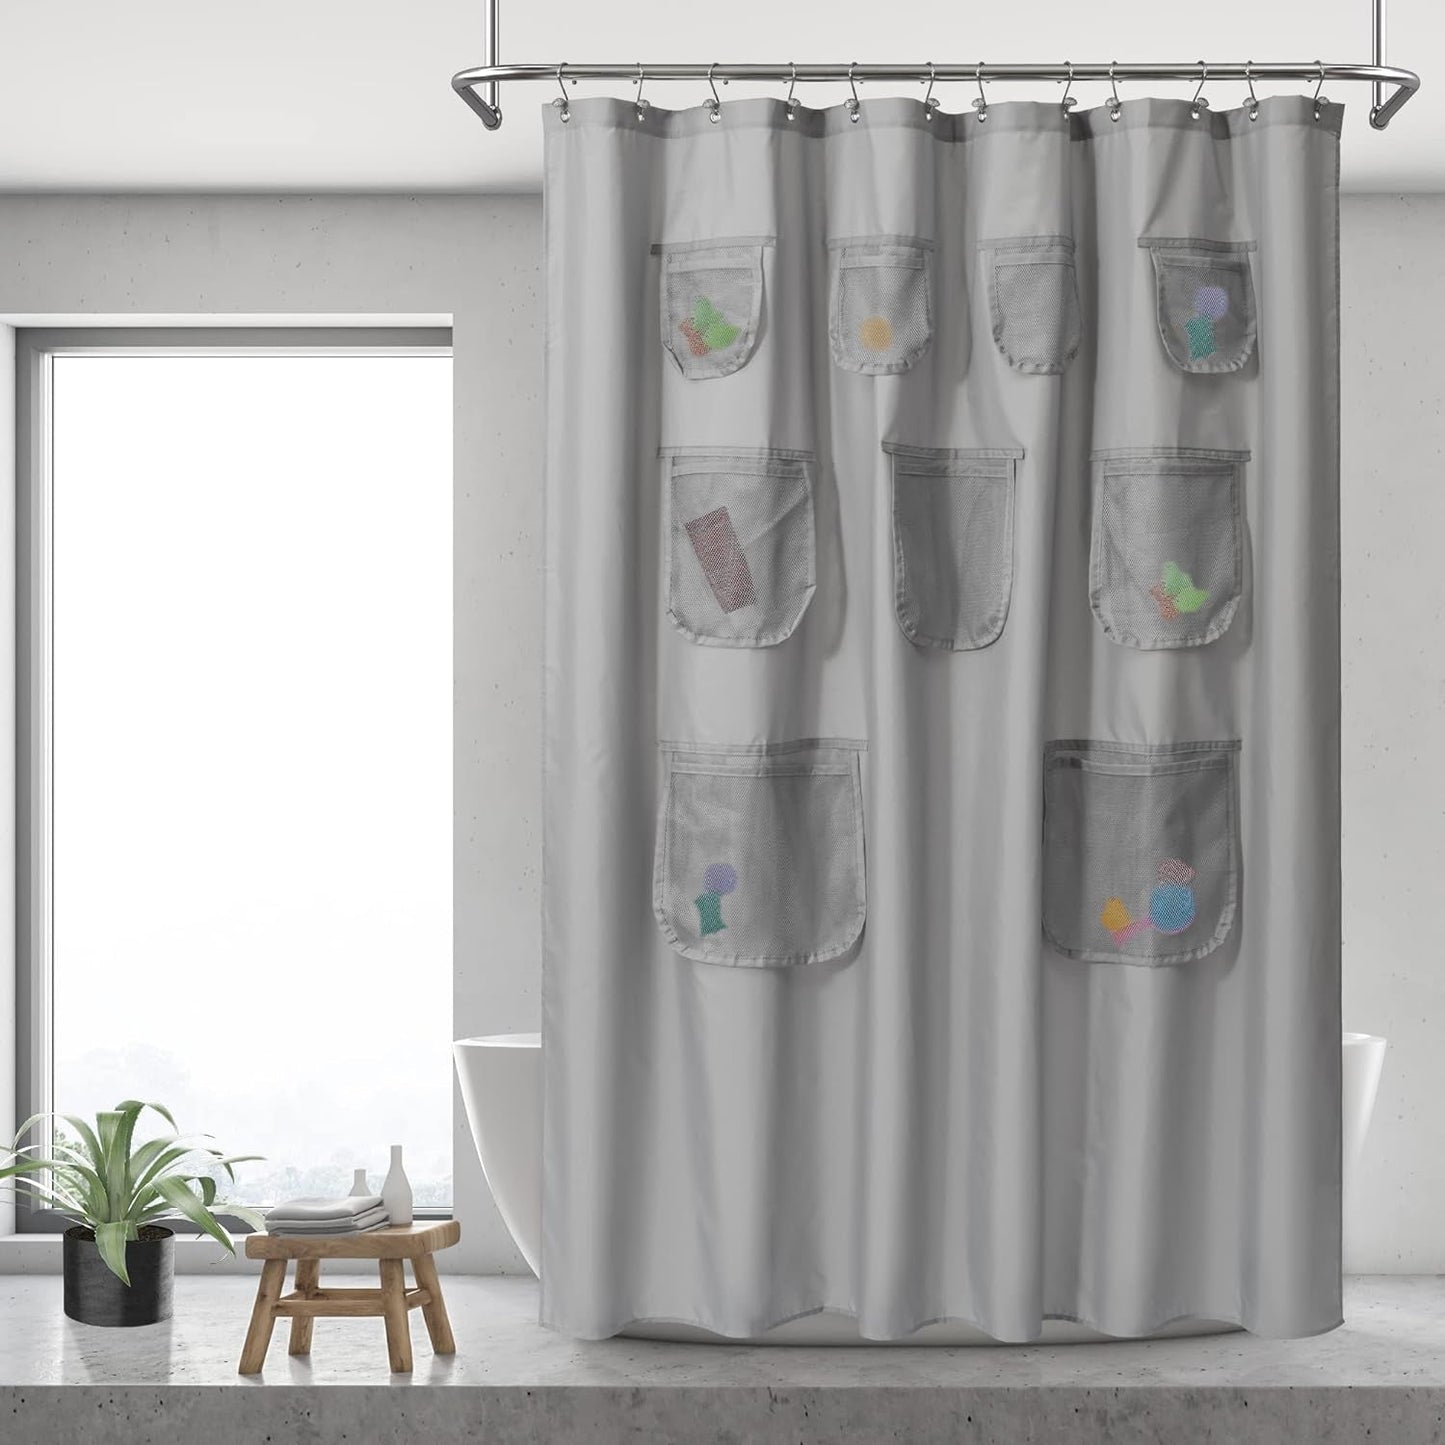 N&Y HOME Water Repellent Fabric Shower Curtain or Liner with 9 Mesh Pockets - White, 71X72 Inches